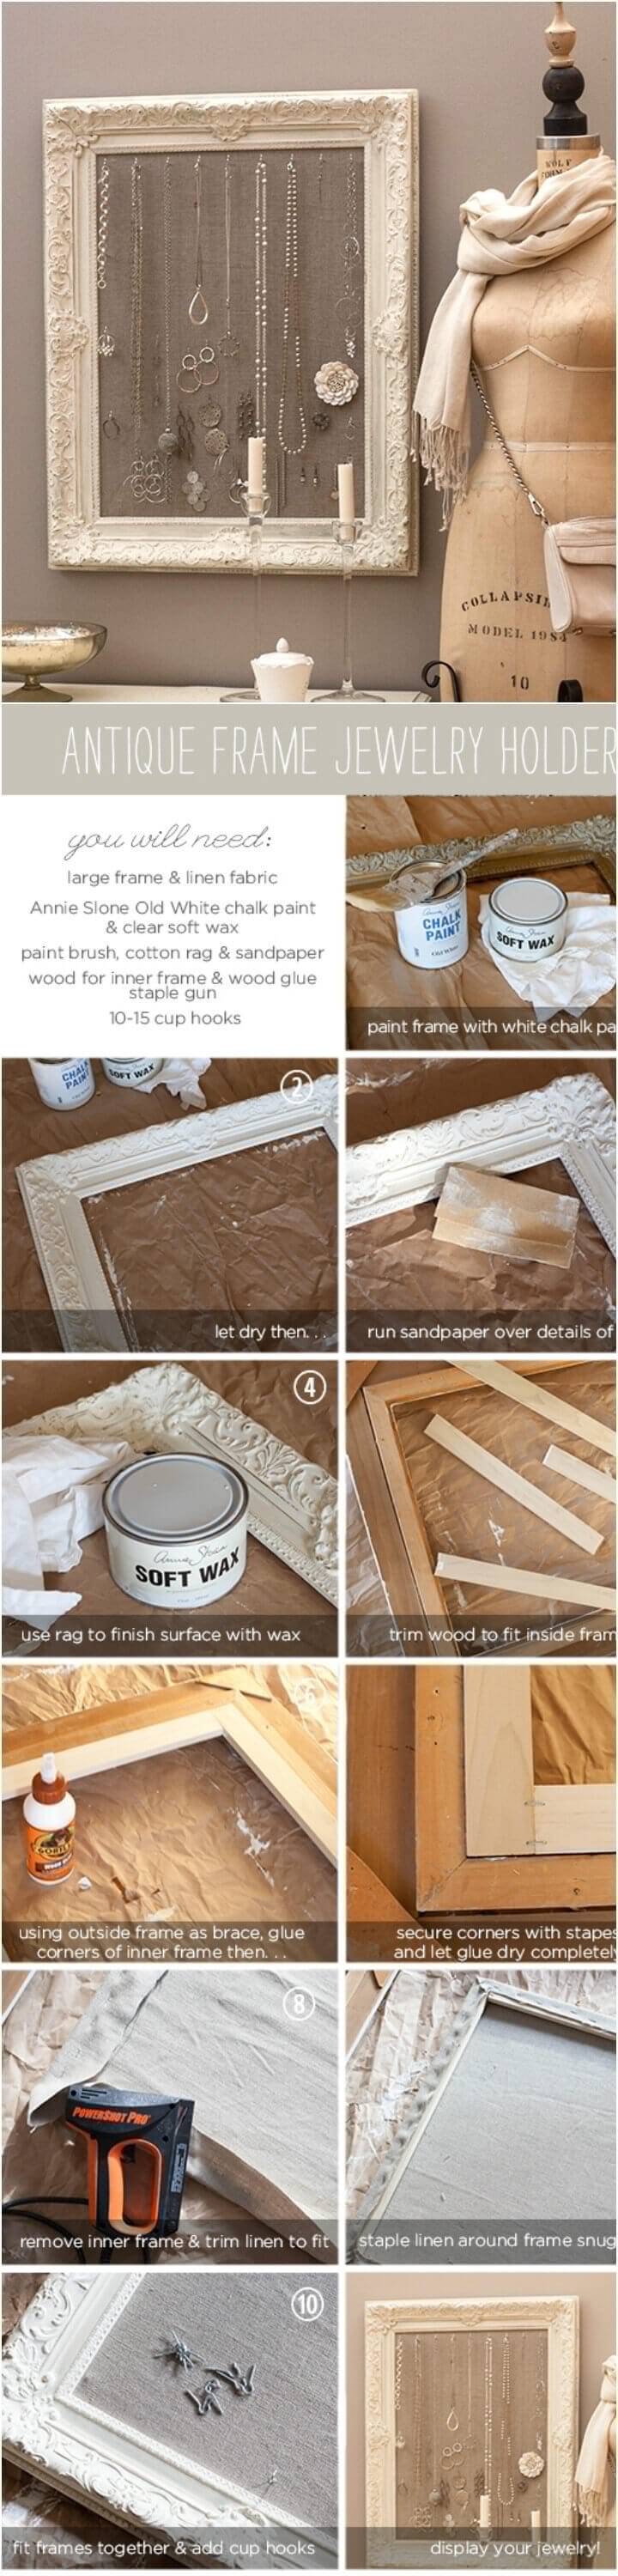 how to turn an antique frame into jewelry organizer